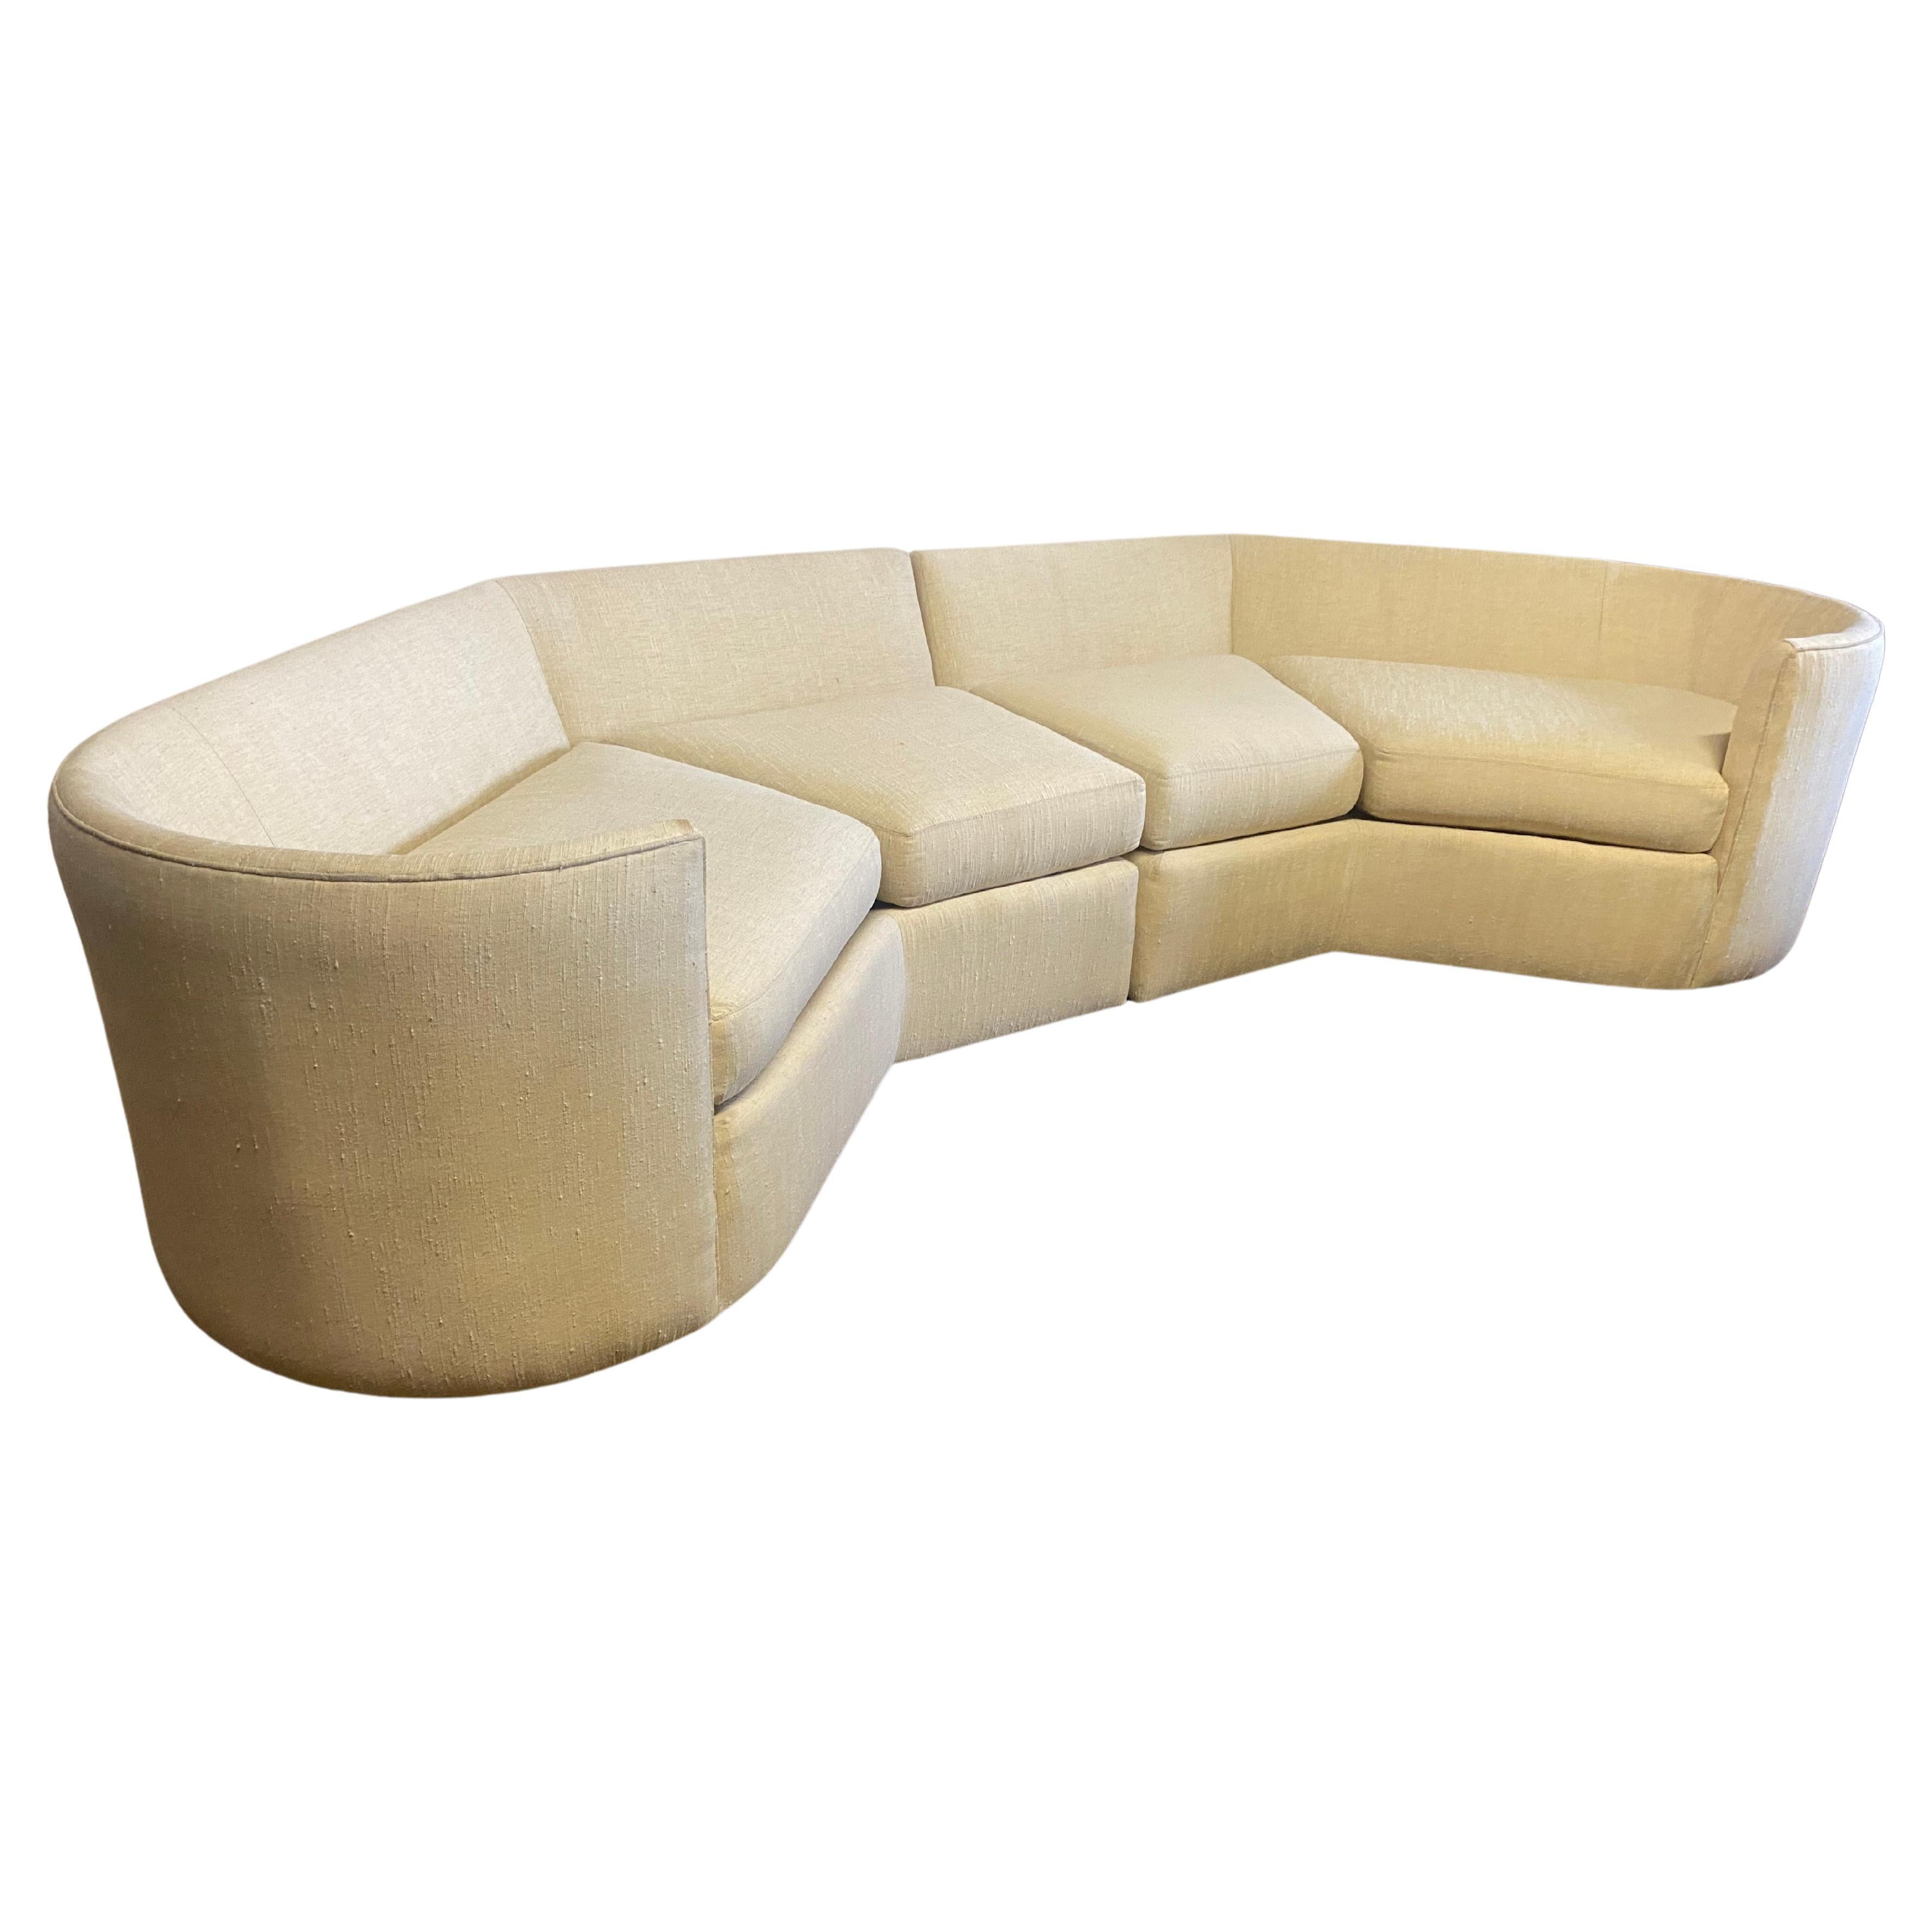 Post Modernist Two-Piece Contemporary Sofa by Charak Furniture Co. For Sale